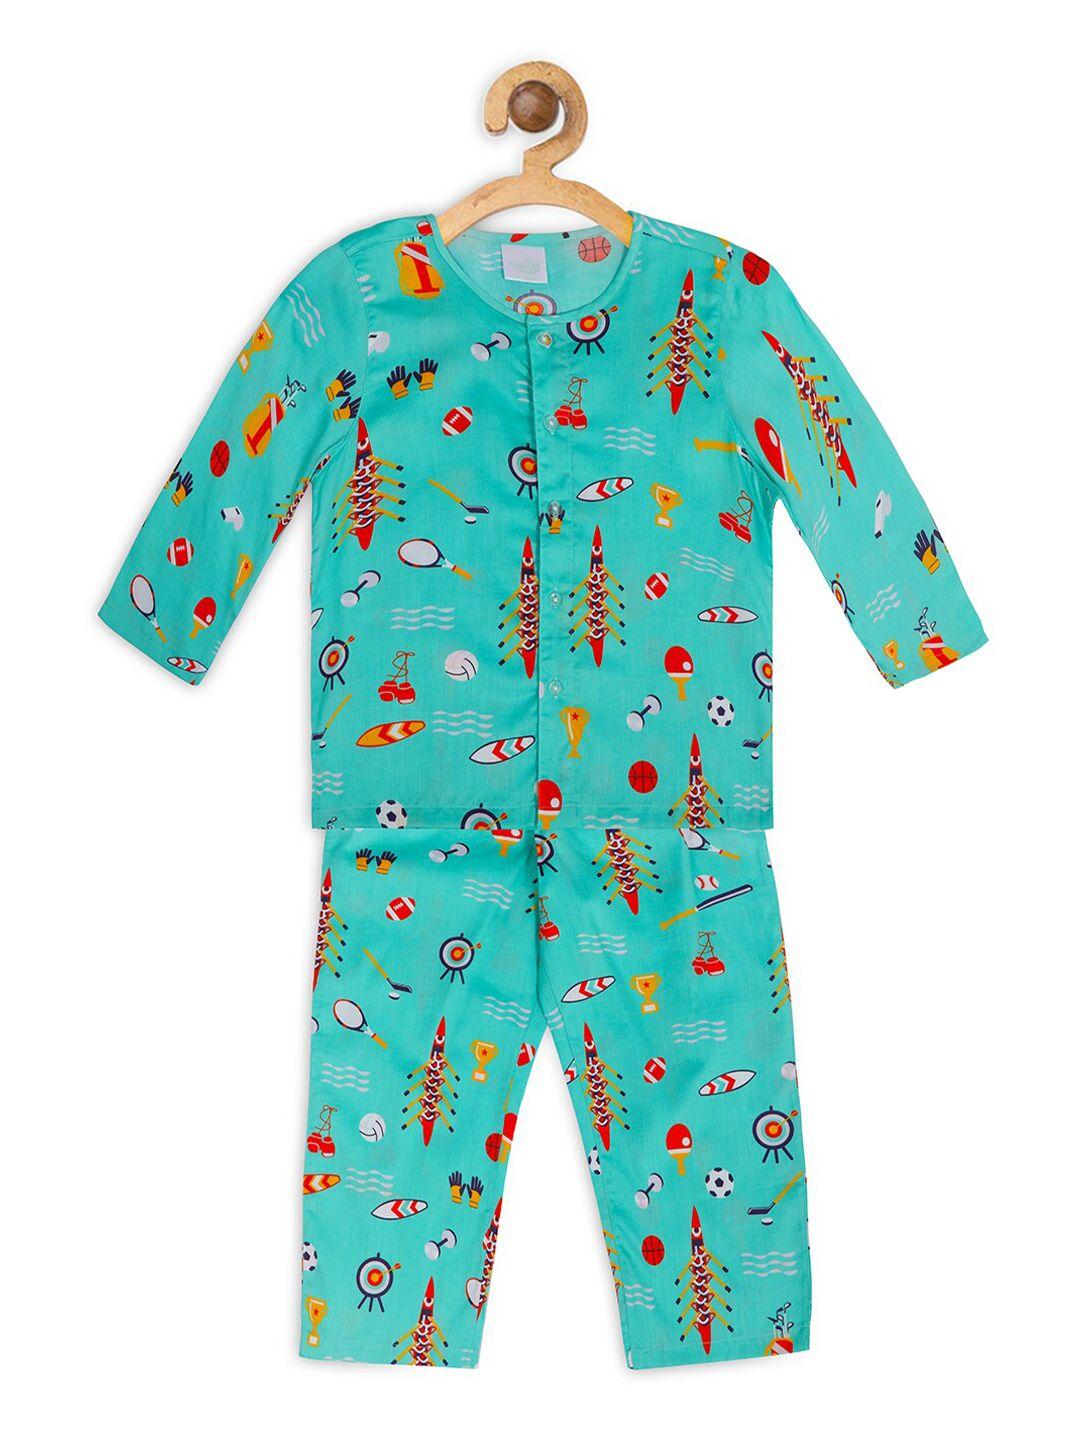 nigh nigh boys turquoise blue & red printed sustainable night suit